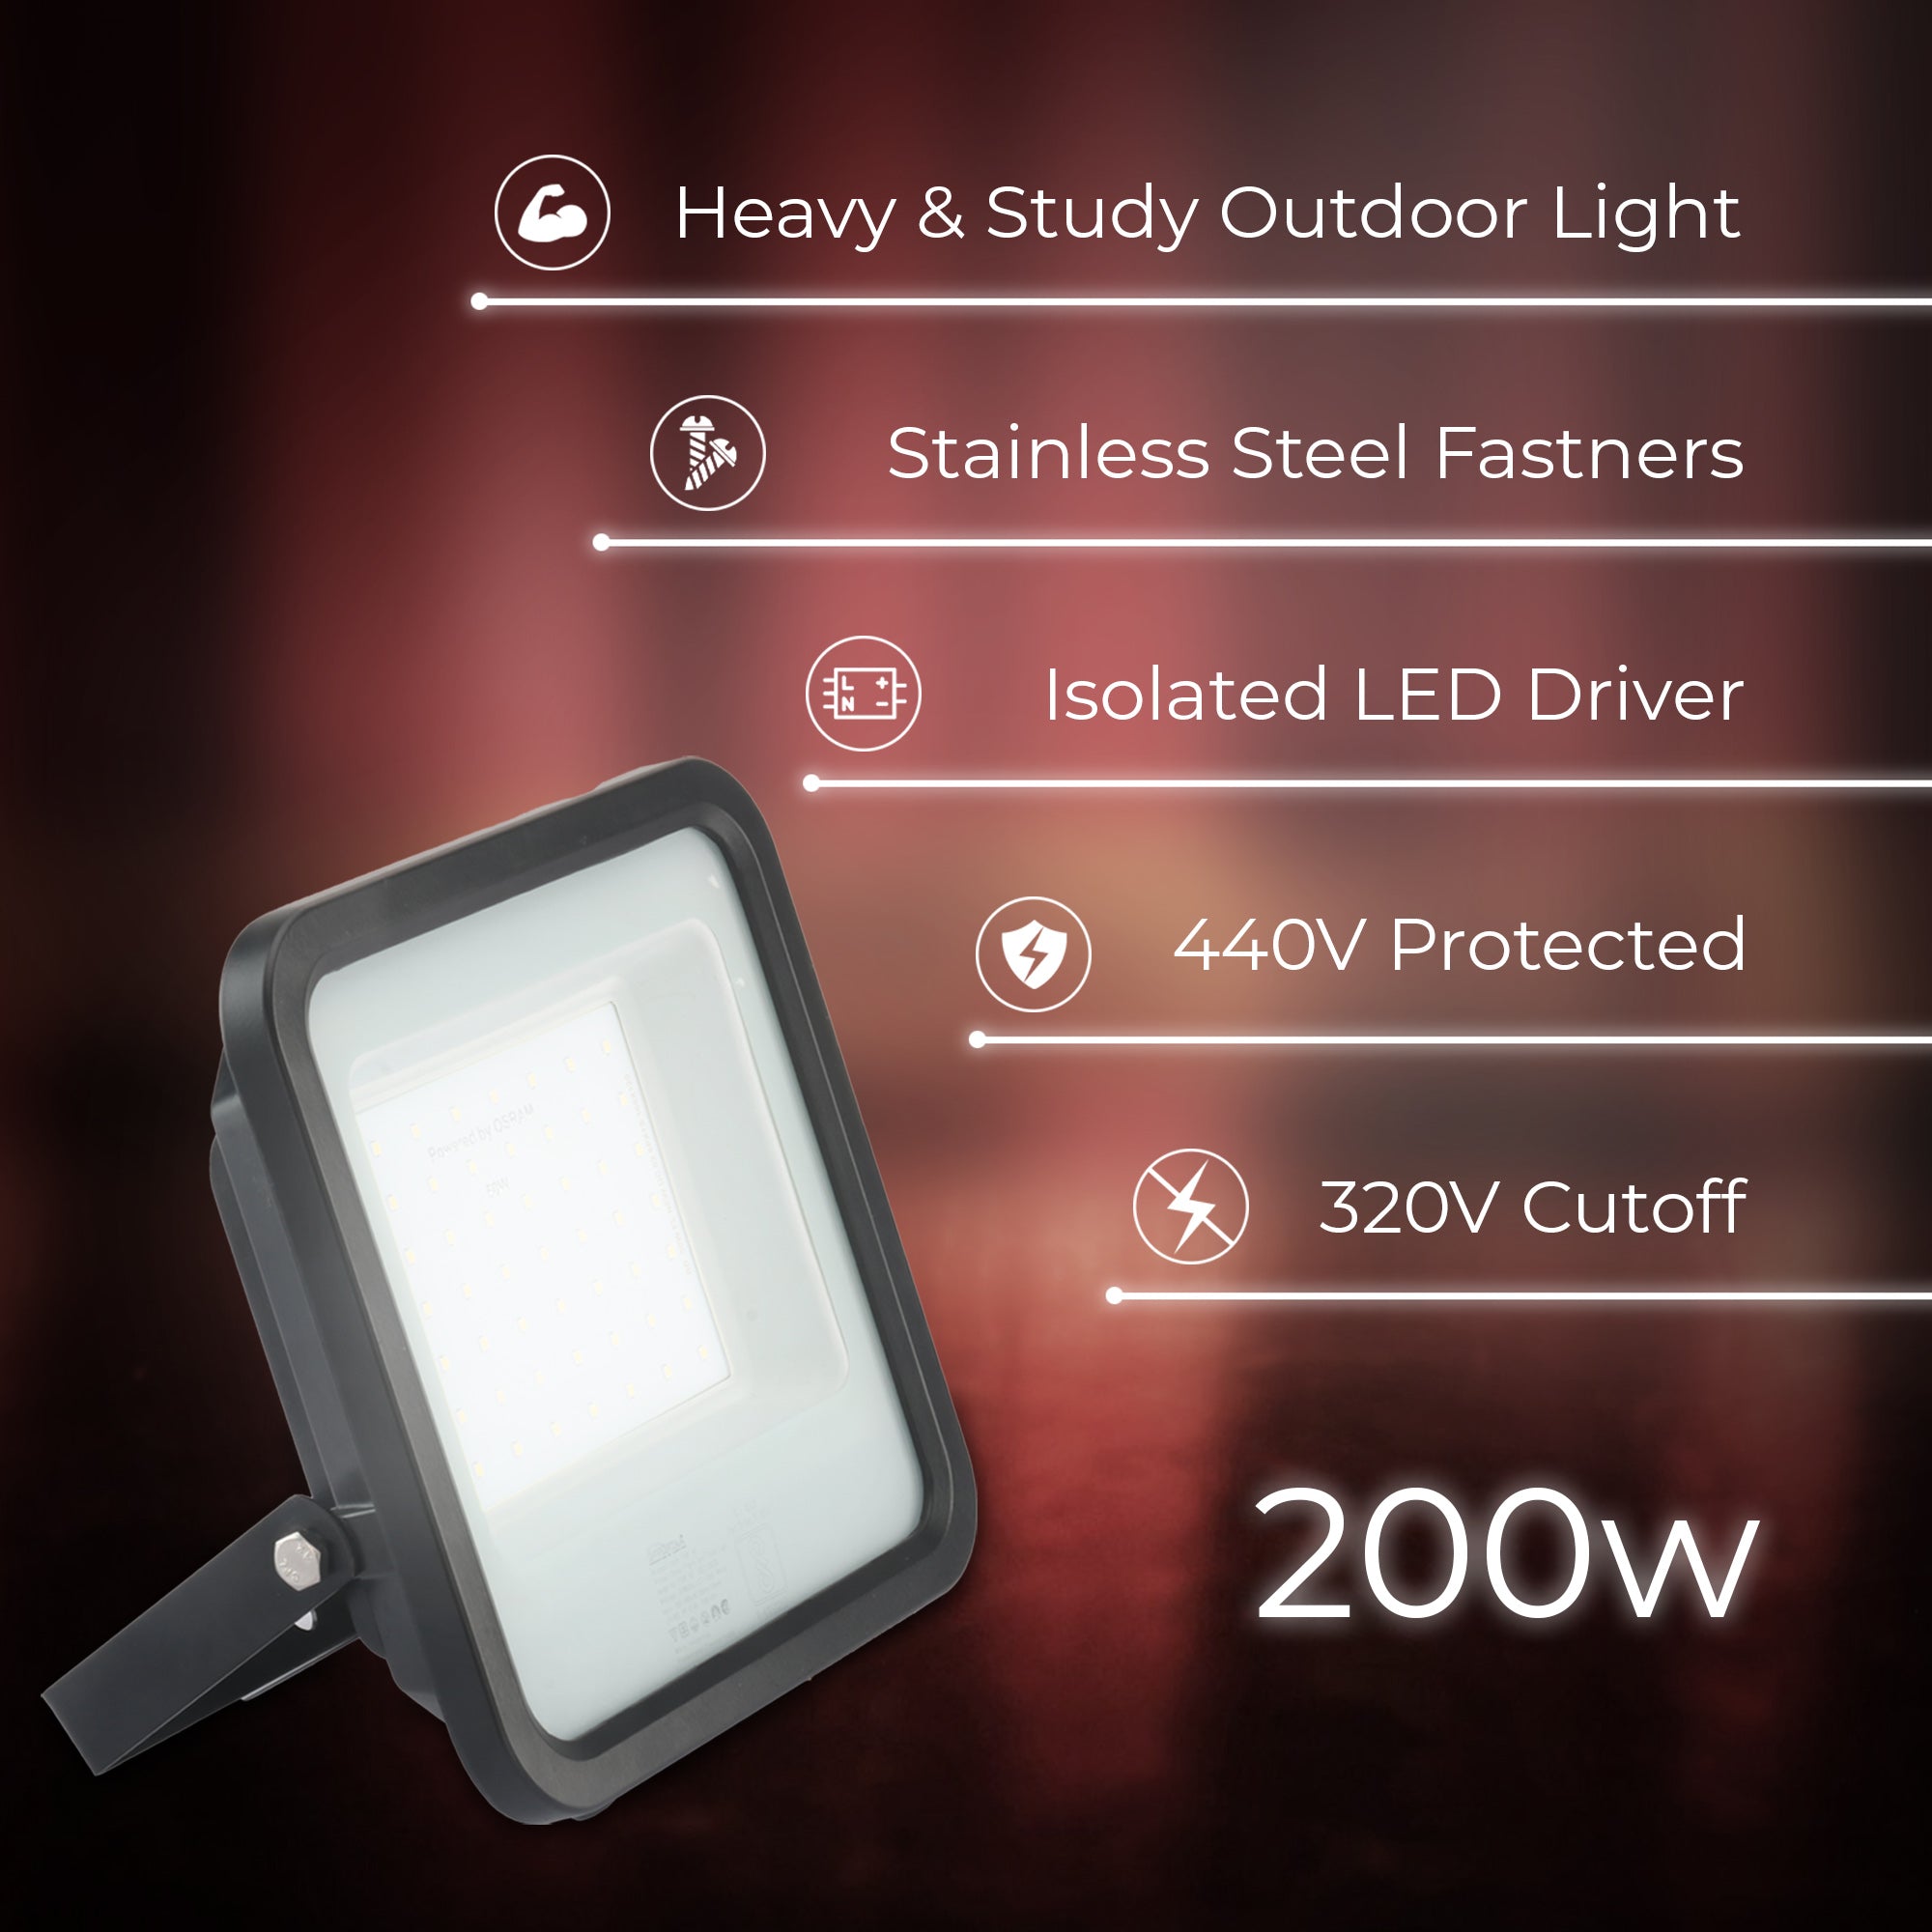 Specifications of Fabra 200W led focus light #watts_200w